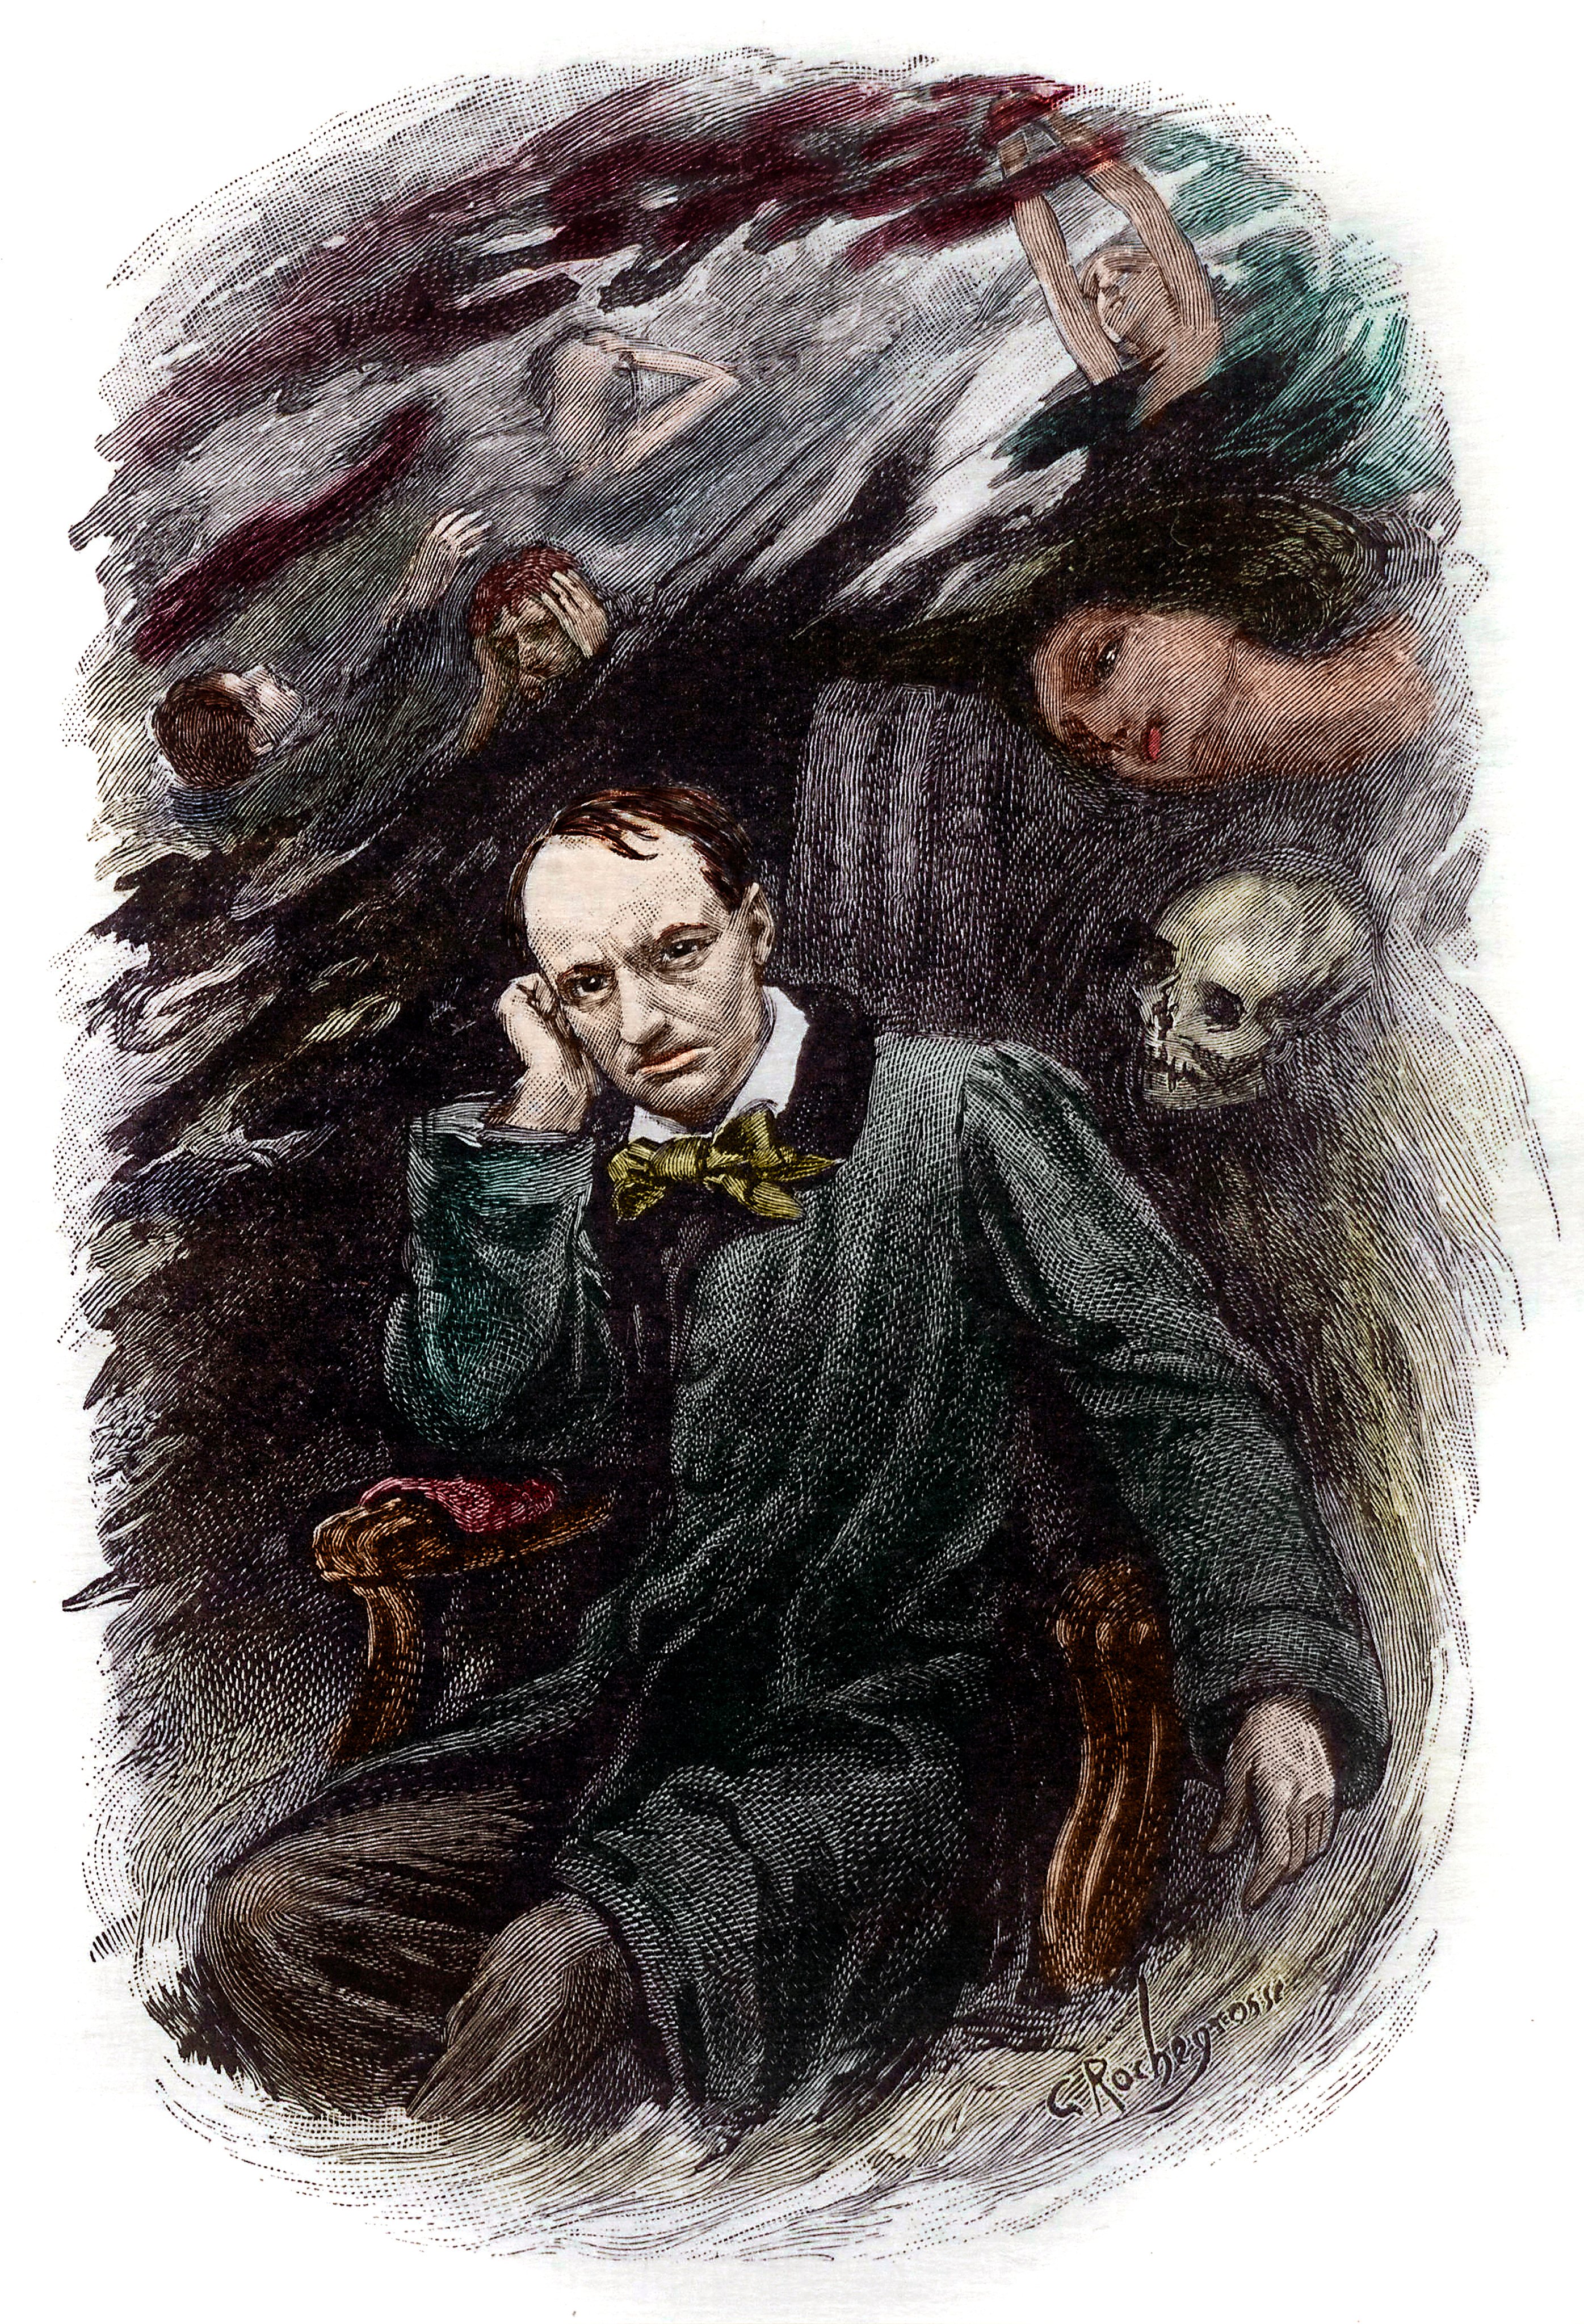 A representation of French poet Charles Baudelaire (1821-1867) for his 1857 book “Les Fleurs du Mal” (“The Flowers of Evil”). Photo: Getty Images